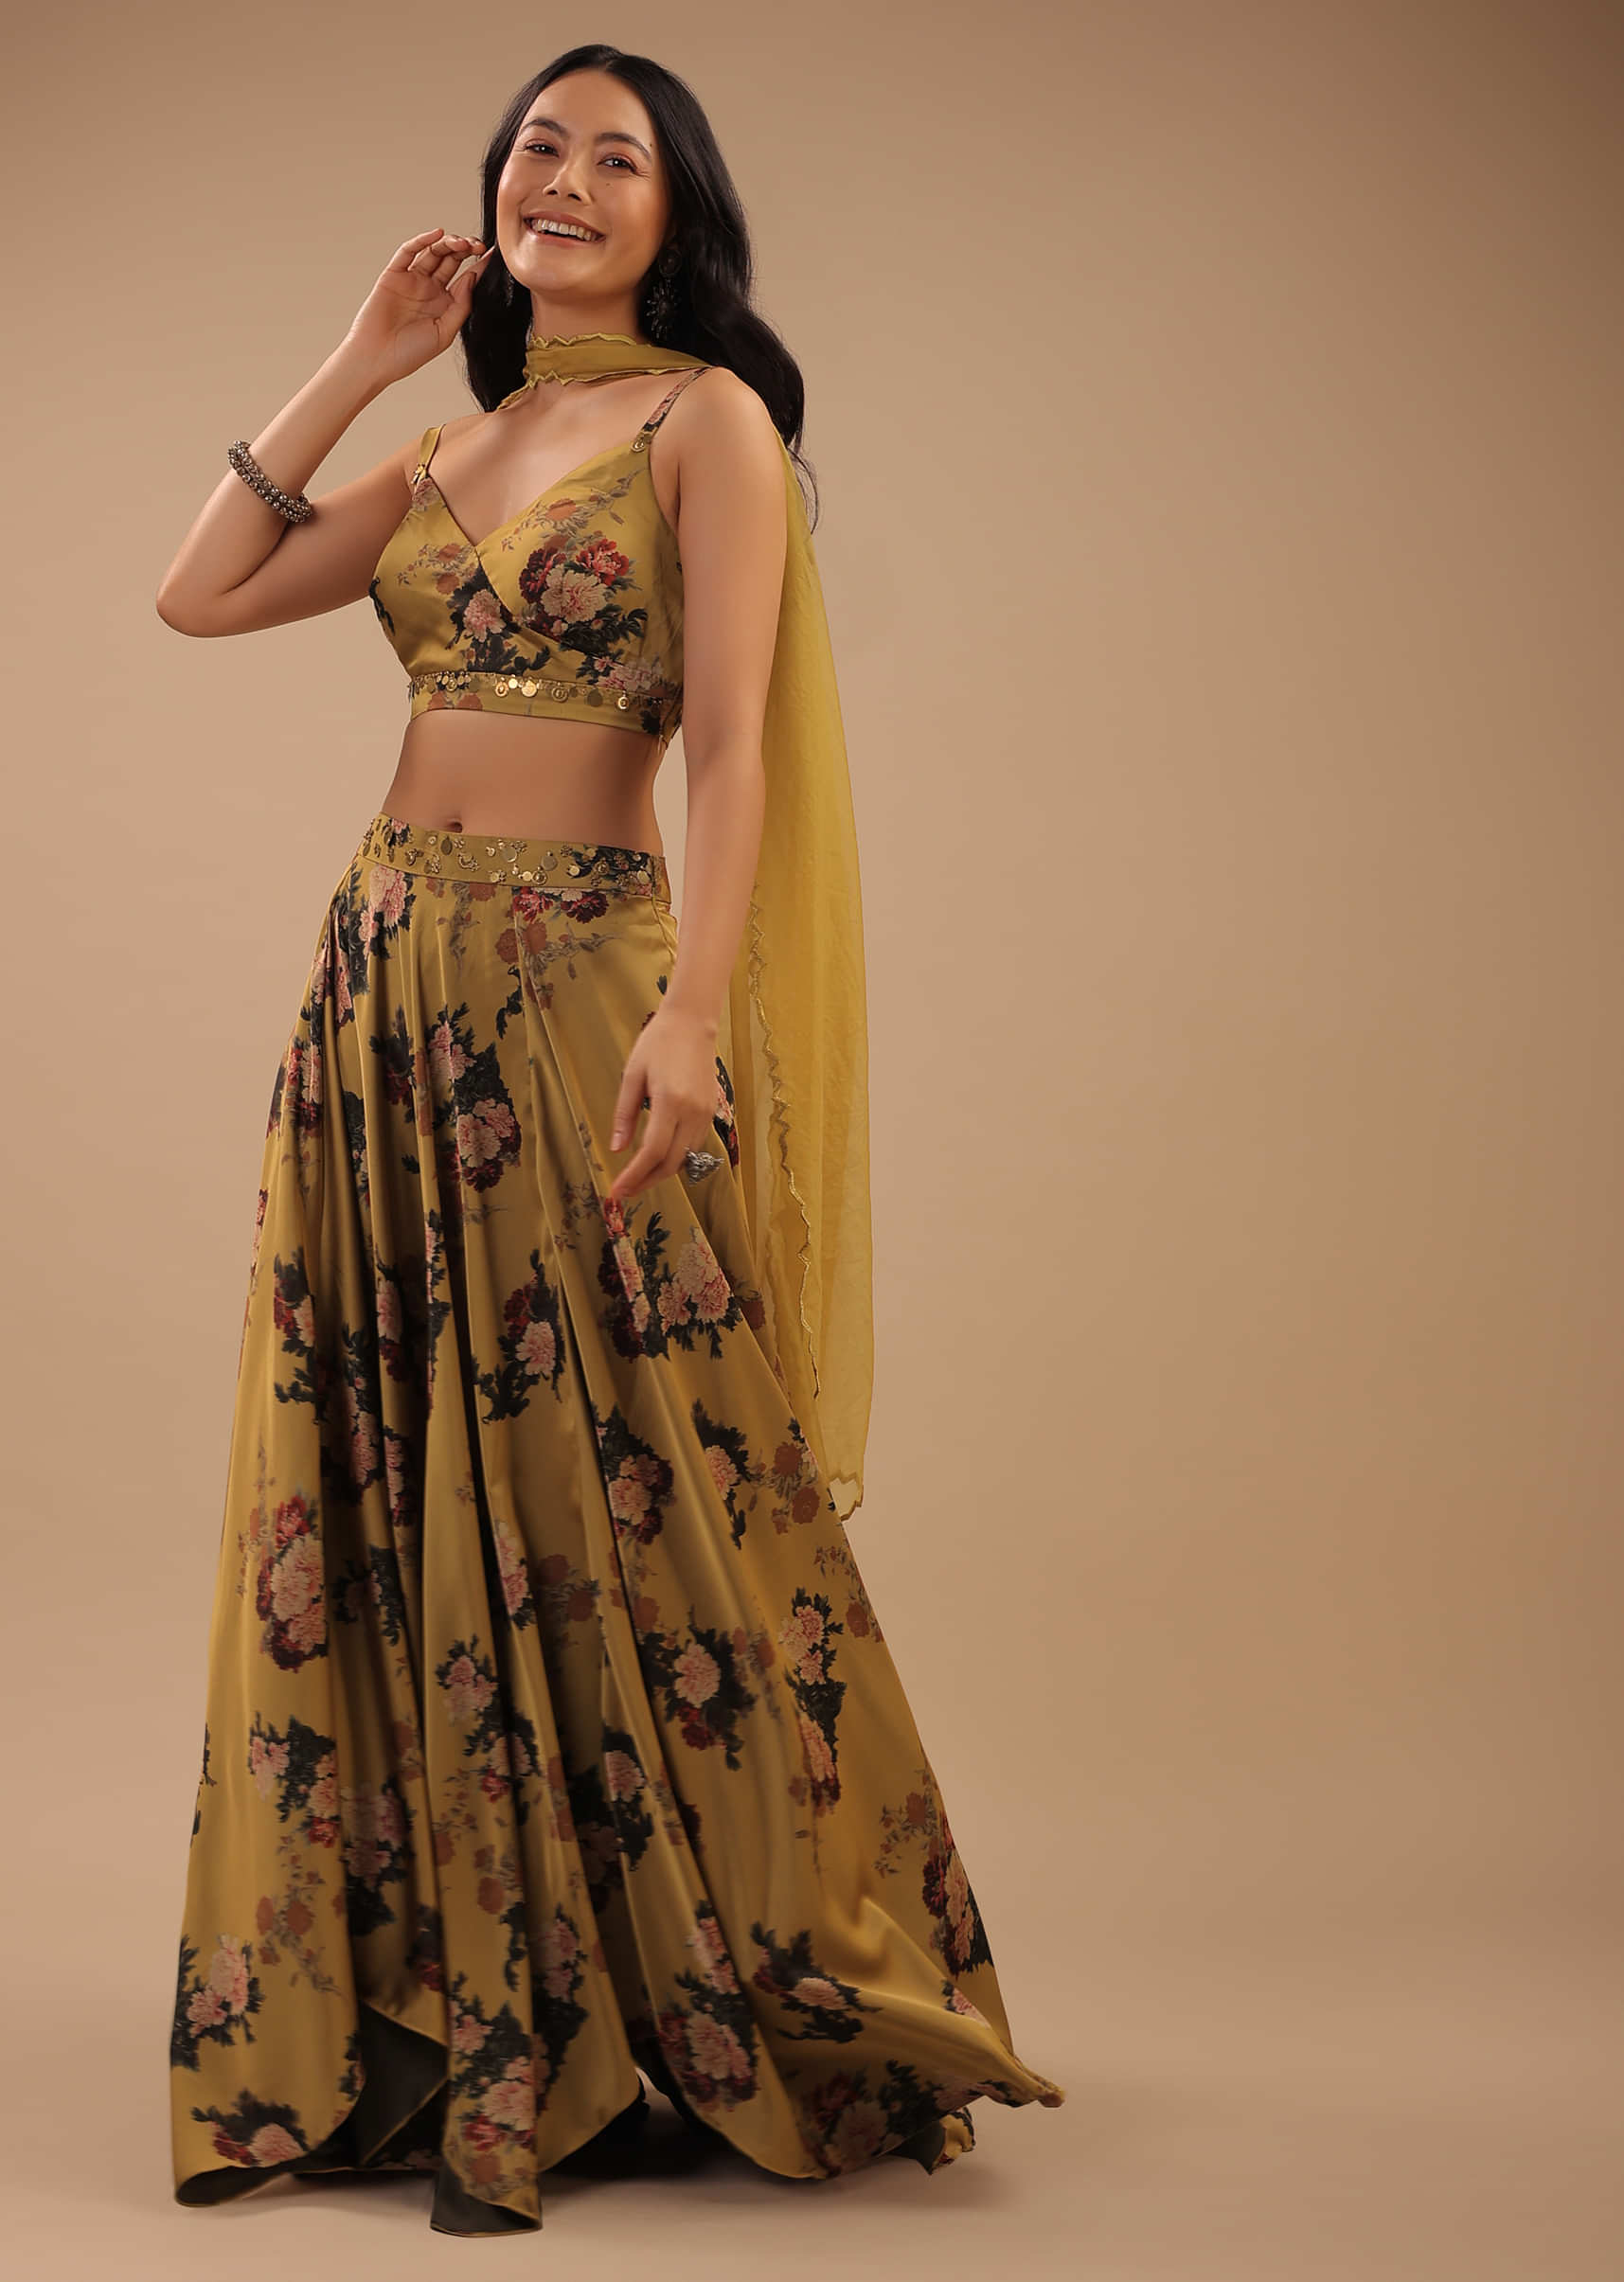 Mustard Gold Satin Crop Top And Skirt With Floral Print And Scallop Cut Hemline